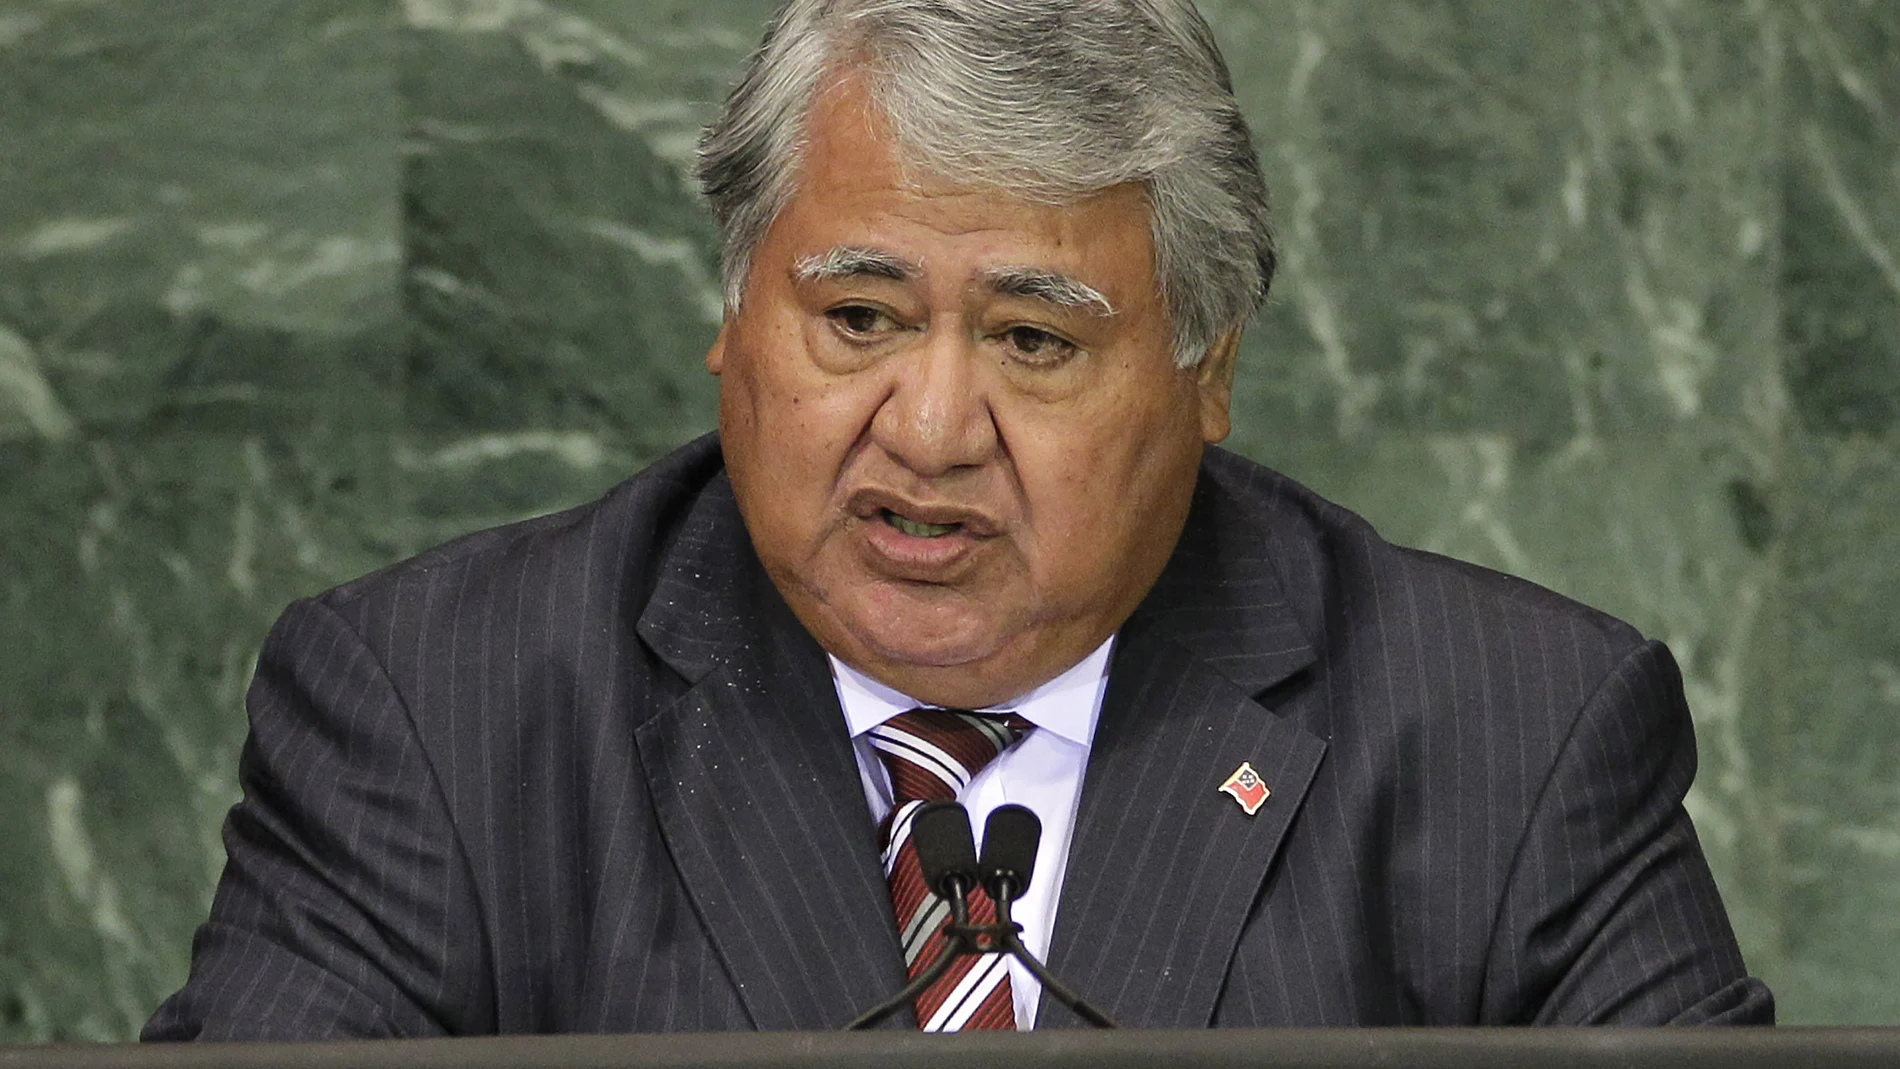 FILE - In this Sept. 20, 2010, file photo, Samoa Prime Minister Tuilaepa Sailele Malielegaoi addresses a summit at the United Nations headquarters. On Thursday, Nov. 19, 2020, Malielegaoi addressed the nation live on television and radio and appealed for calm after the country reported it???s first positive test for the coronavirus, although a second test on the same patient returned a negative result. (AP Photo/Frank Franklin II, File)